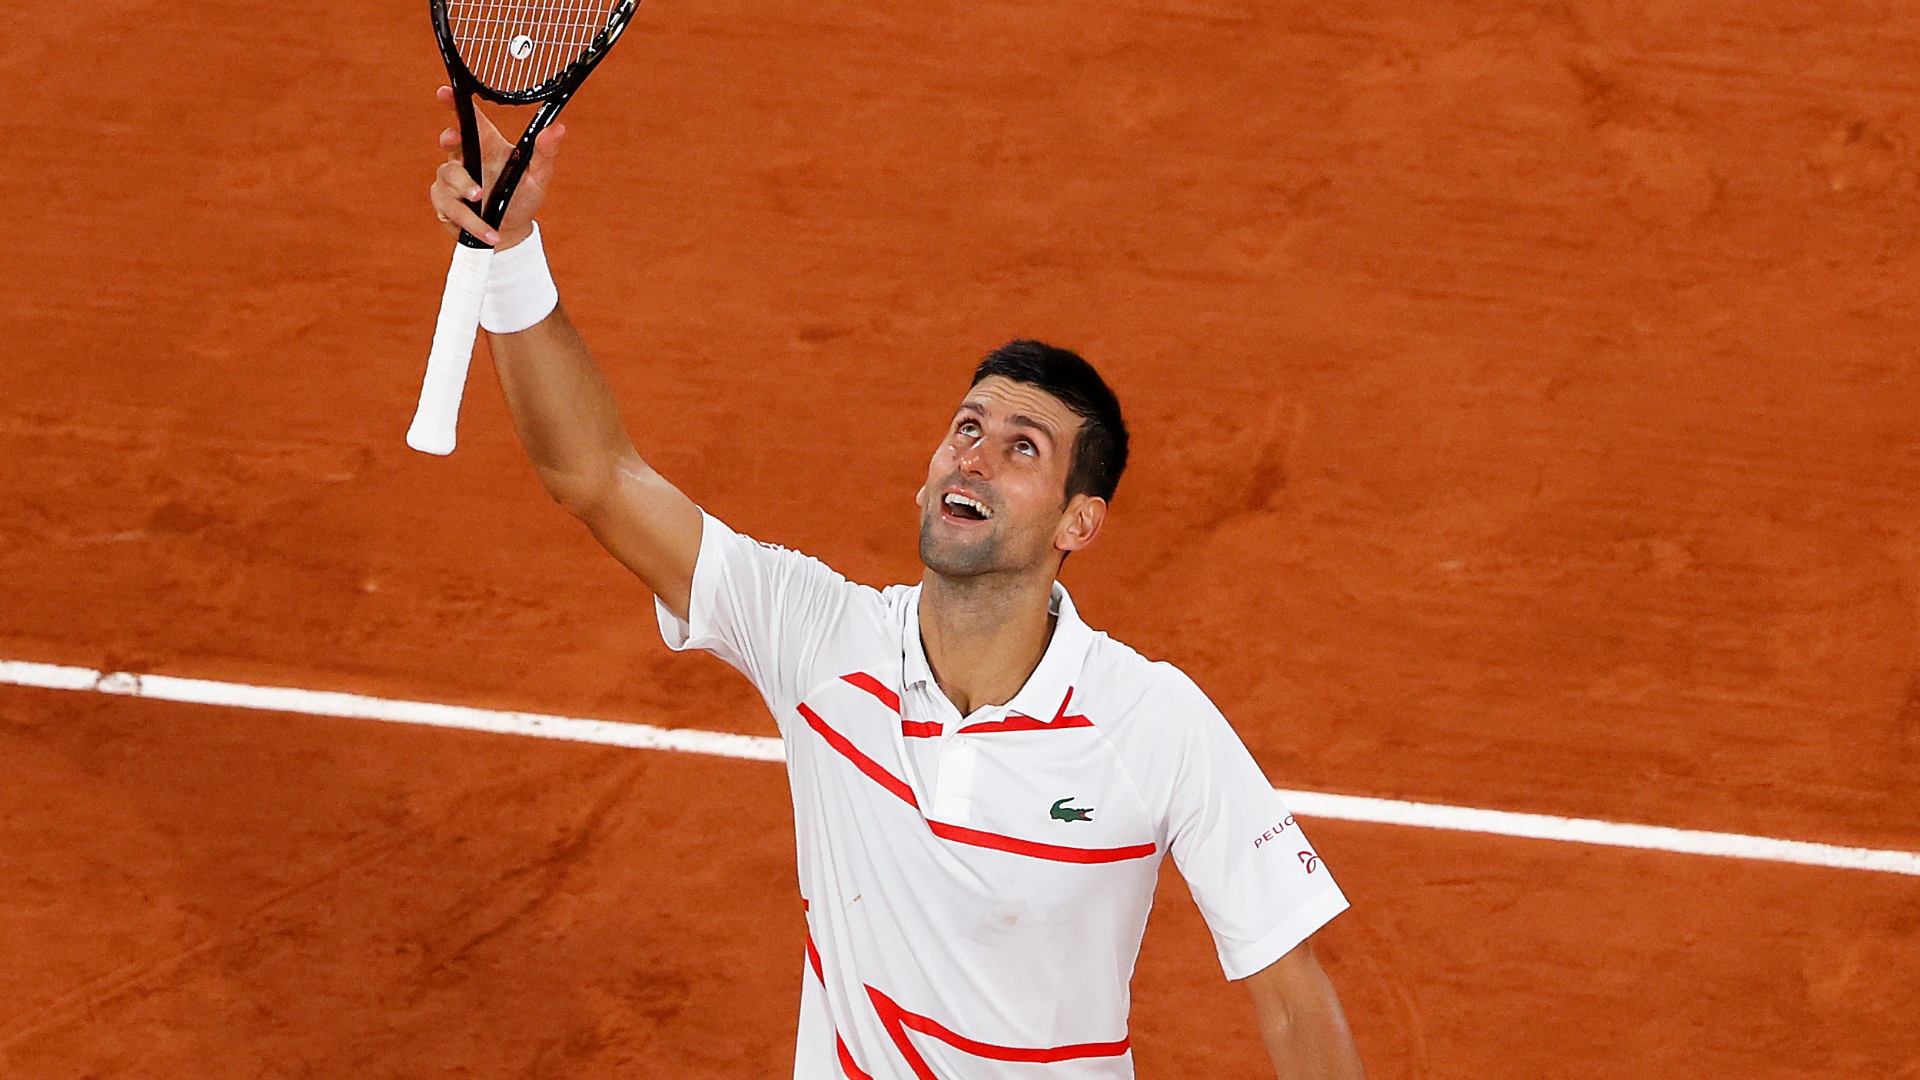 Novak Djokovic made an imperious start to his Roland Garros title challenge as the former champion began his pursuit of more glory in Paris.